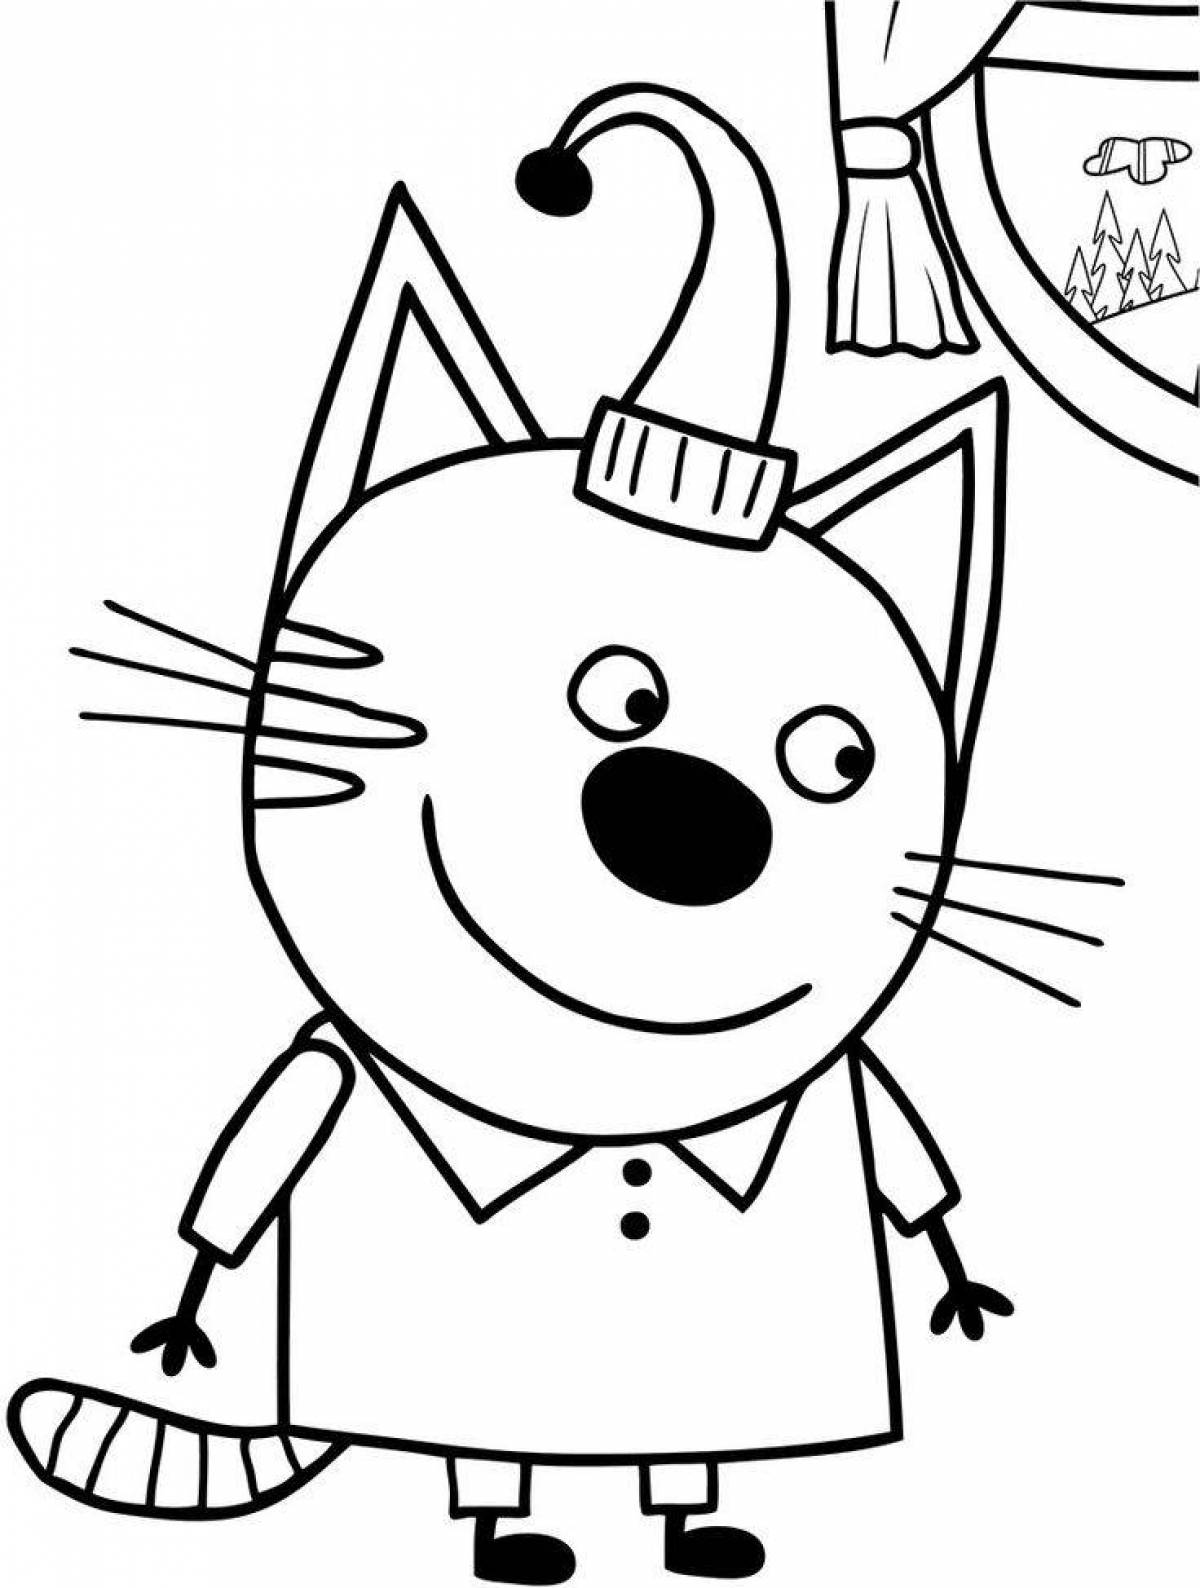 Sweet three cats coloring game